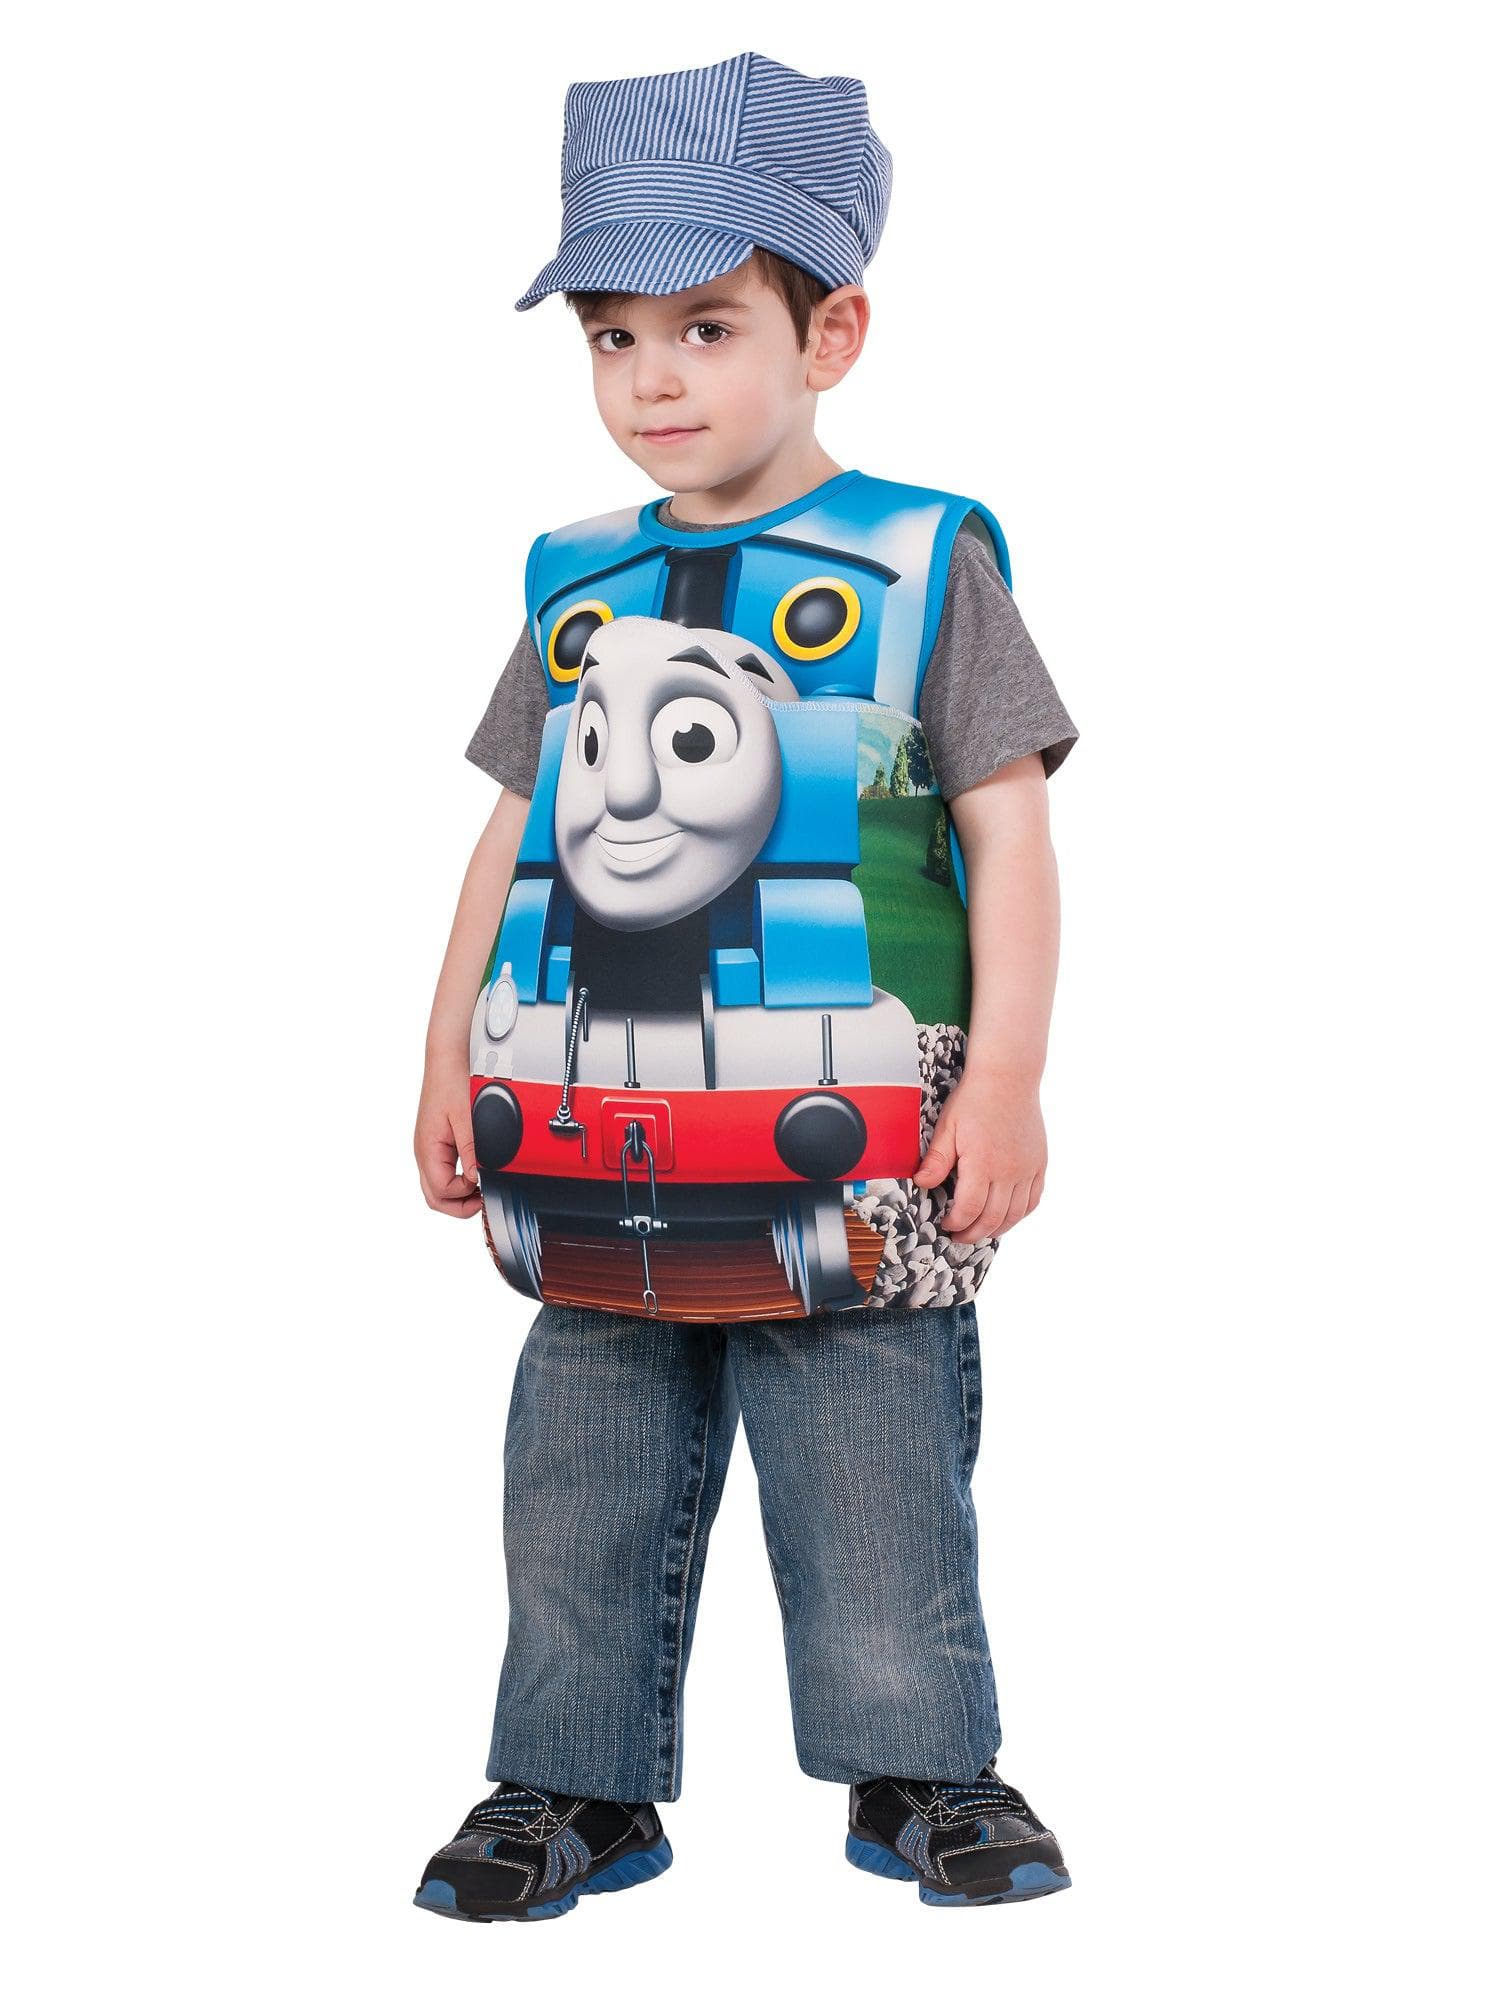 Thomas The Tank Thomas Candy Holder Costume for Toddlers - costumes.com